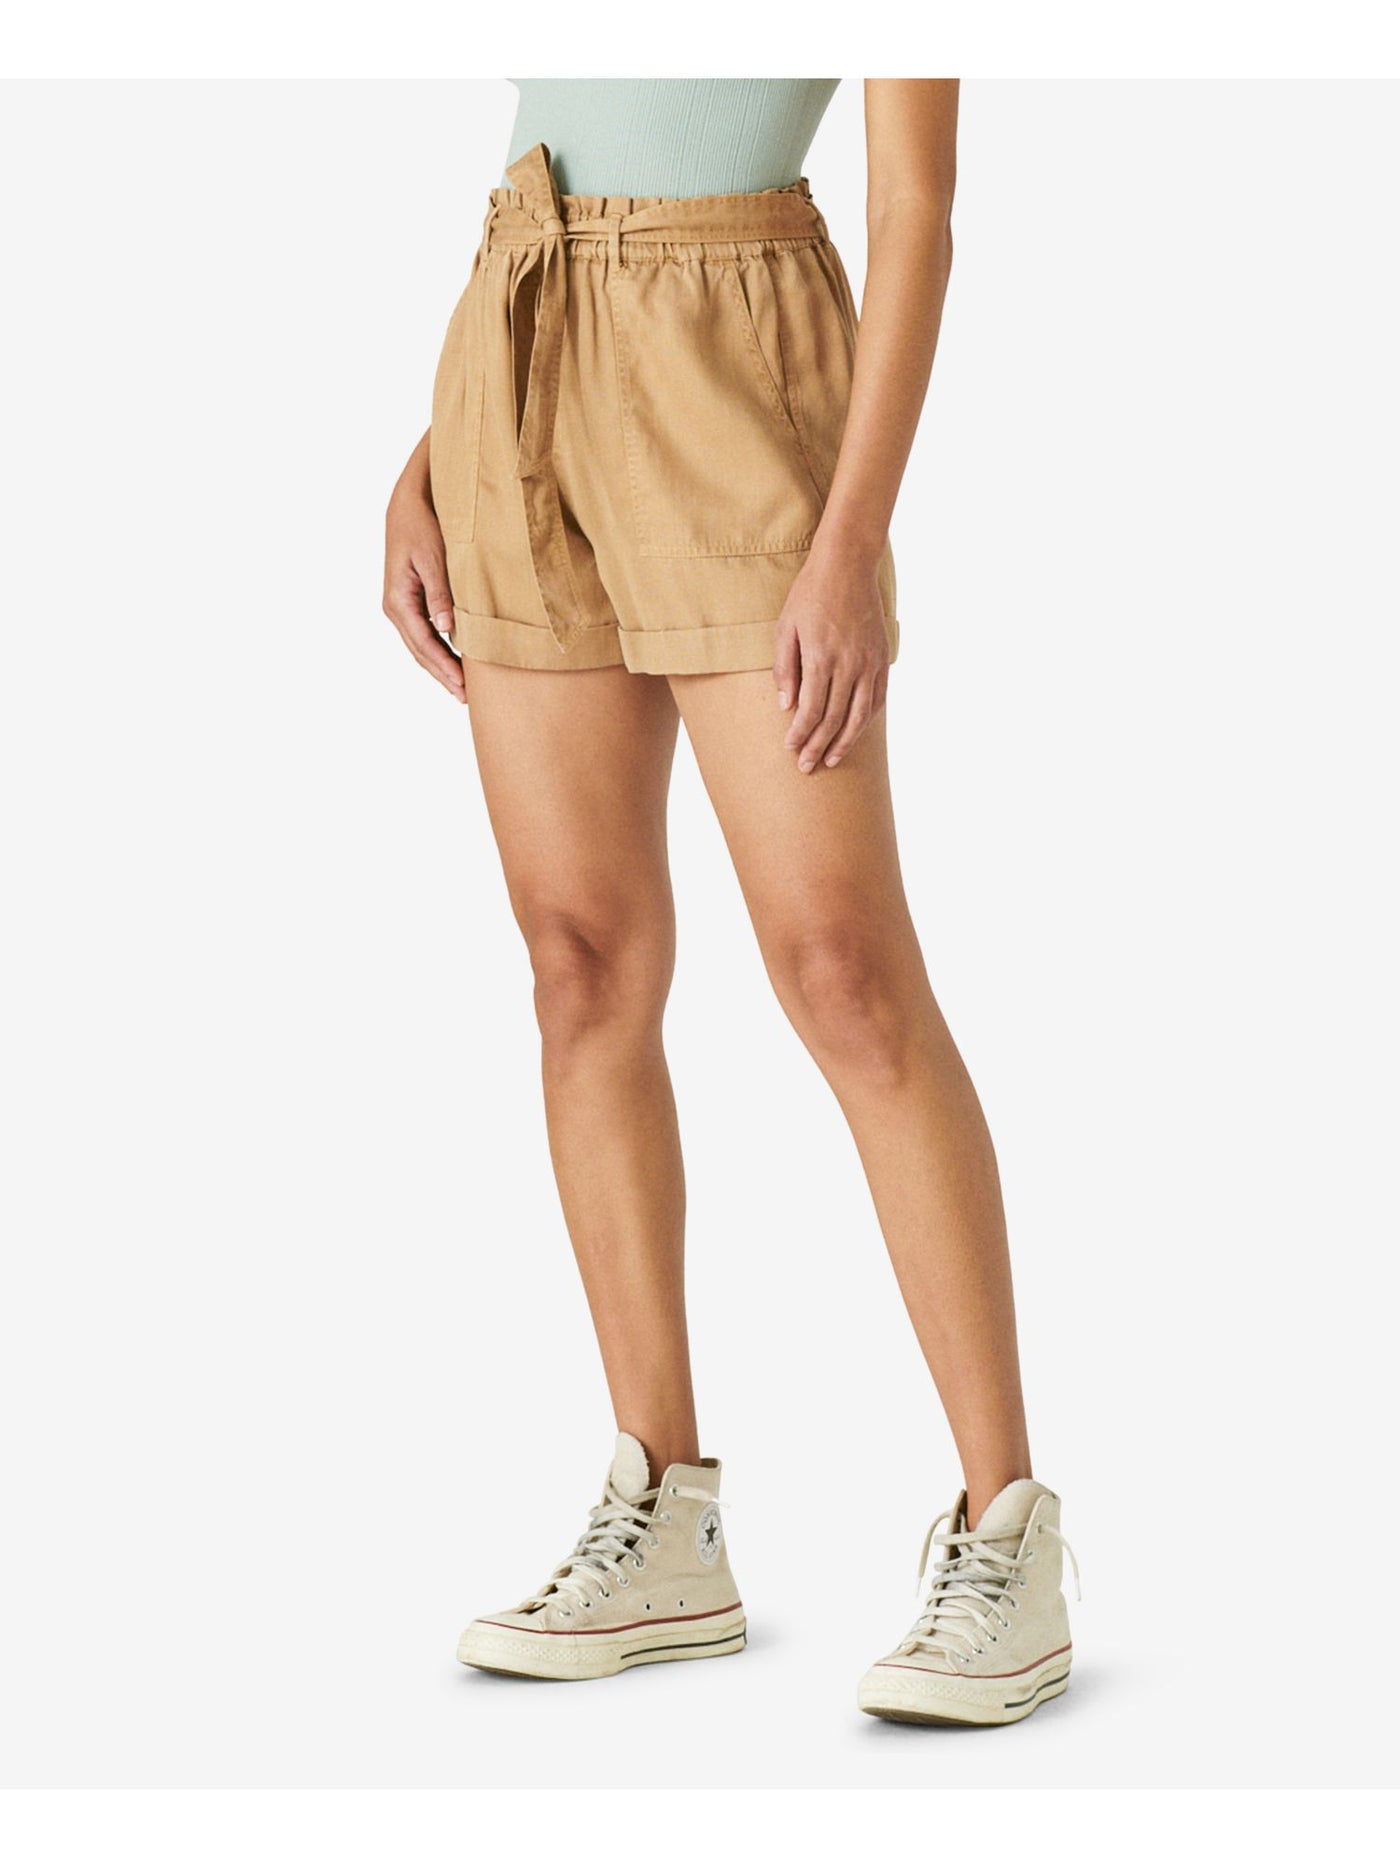 LUCKY BRAND Womens Brown Belted Pocketed Elastic Waist Pull-on High Waist Shorts L